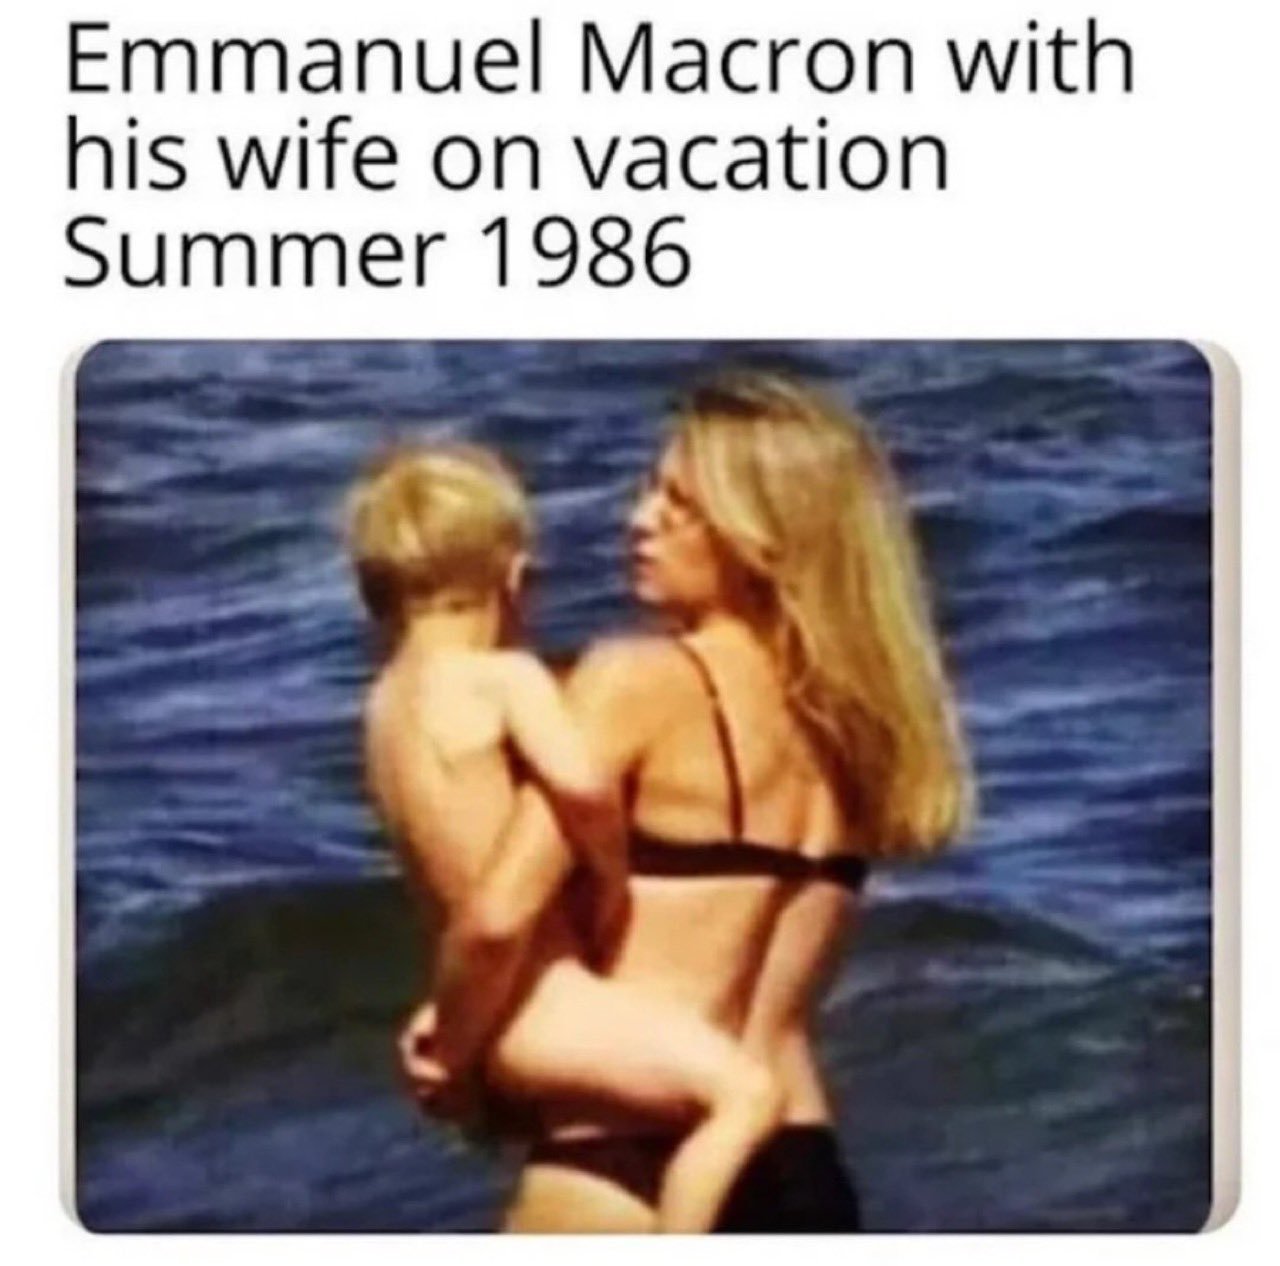 photo french president wife naked